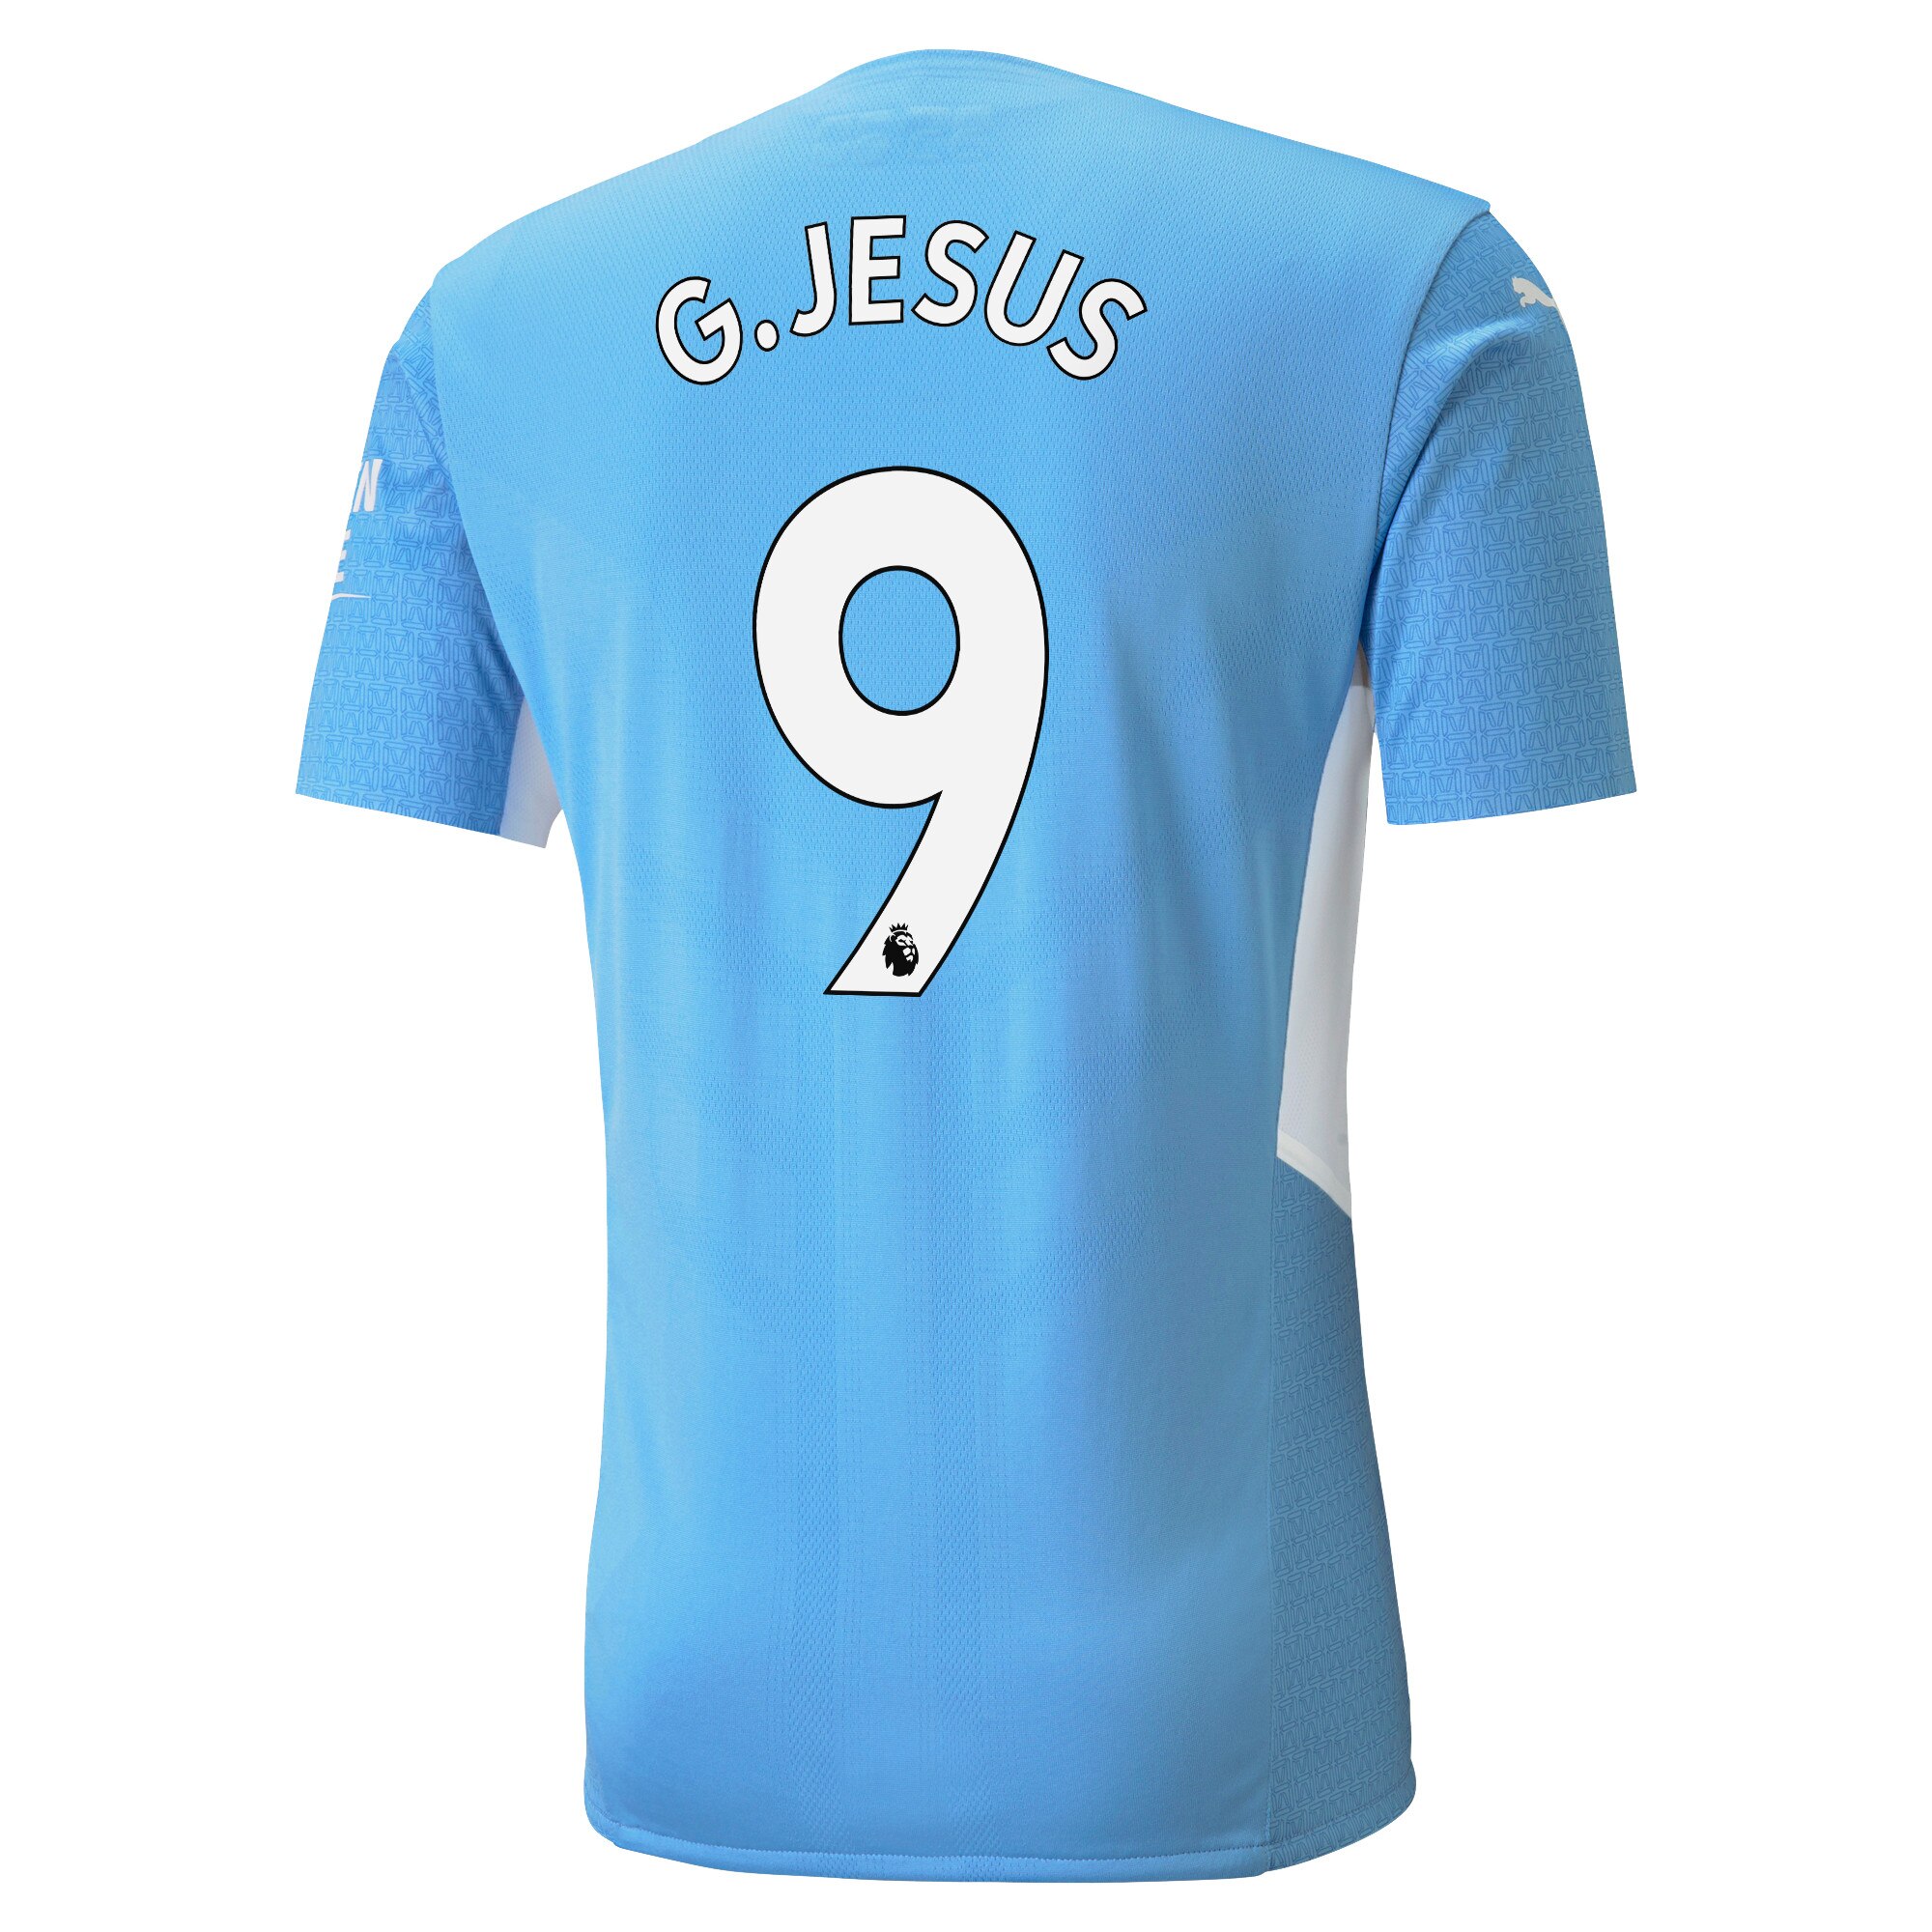 Manchester City Authentic Home Shirt 2021-22 with G.Jesus 9 printing